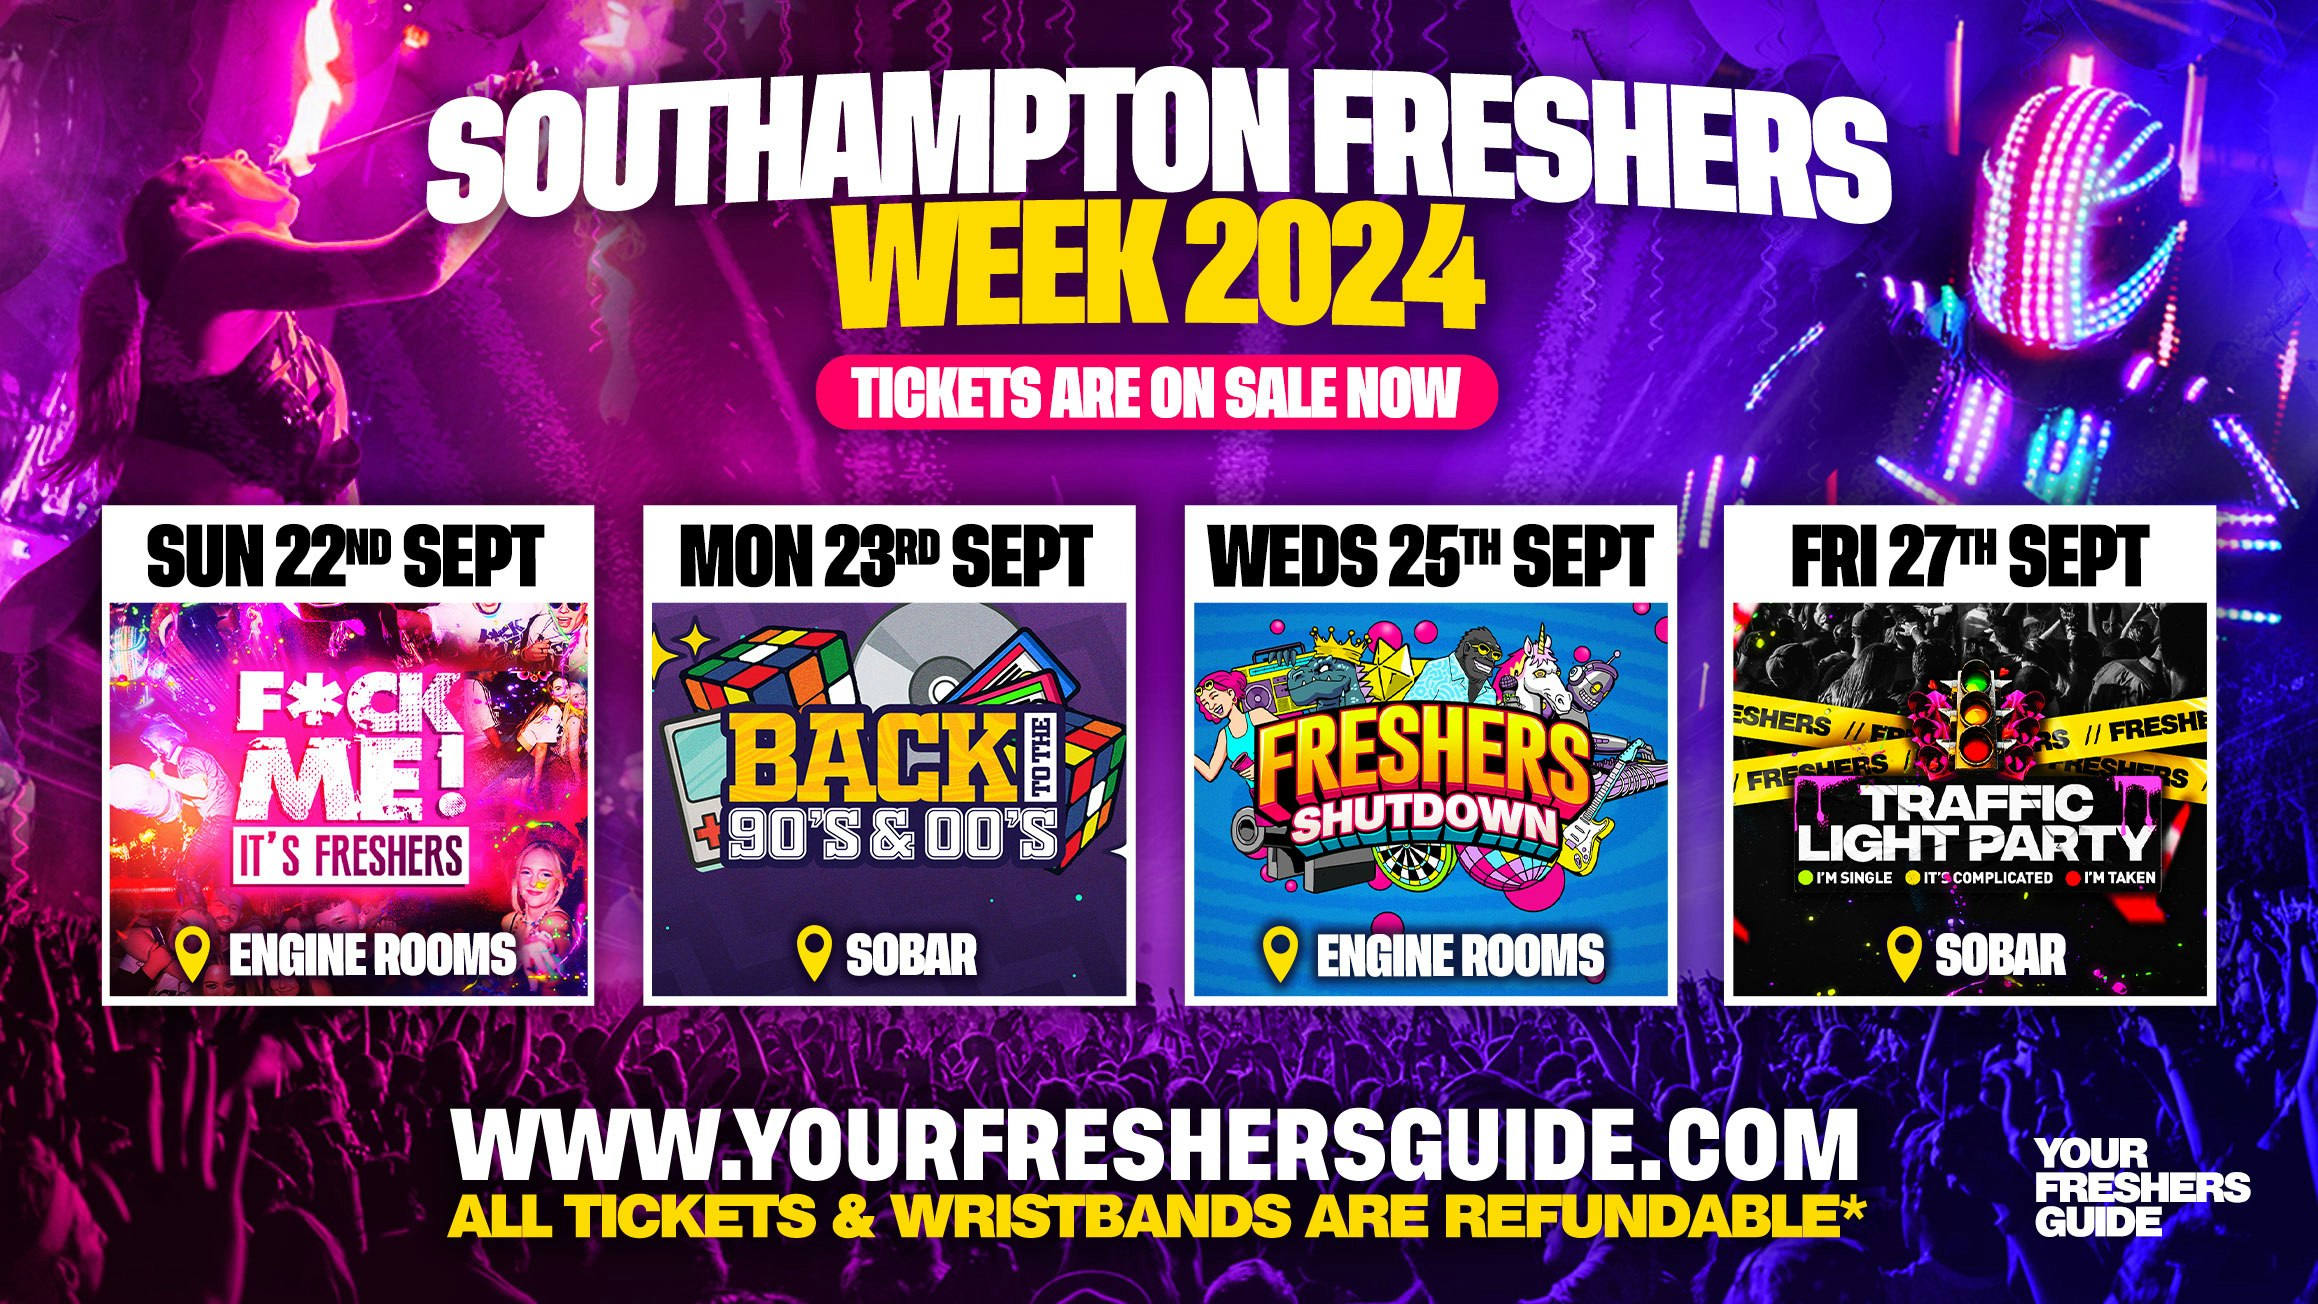 Southampton Freshers Week Wristband 2024 – The Biggest Events of Southampton Freshers 2024 🎉 – FREE Queue Jump With Every Ticket 💃 – TODAY ONLY!